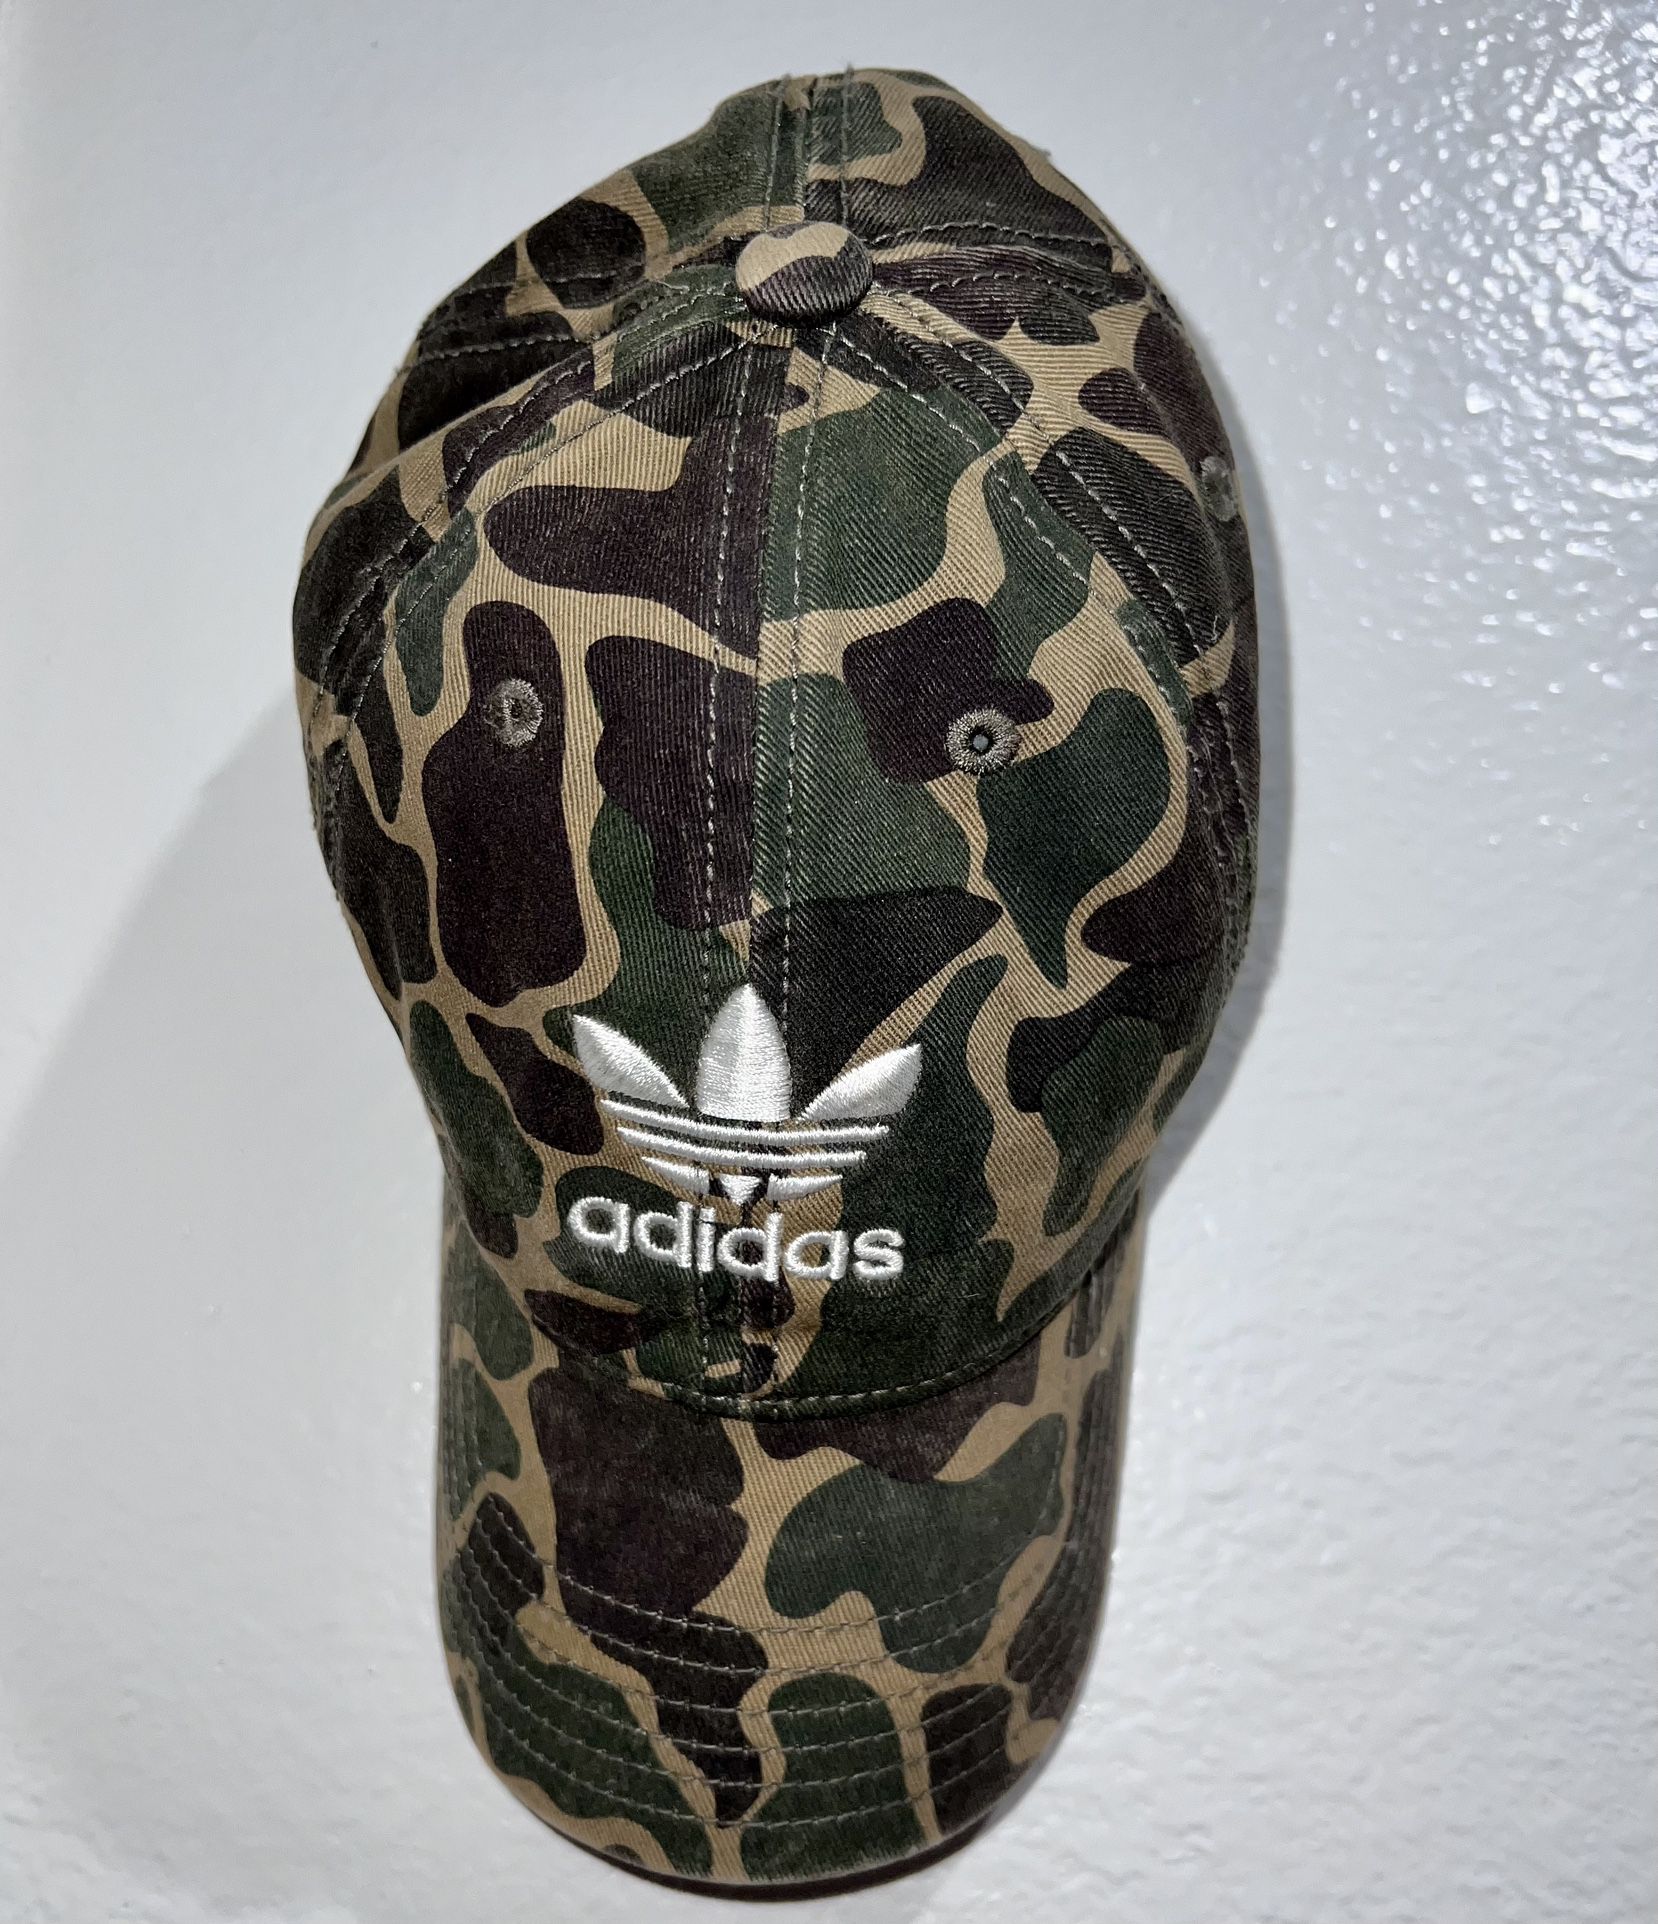 Oficiales ira vocal Adidas Adjustable Army Fatigue Cap for Sale in Lenexa, KS - OfferUp